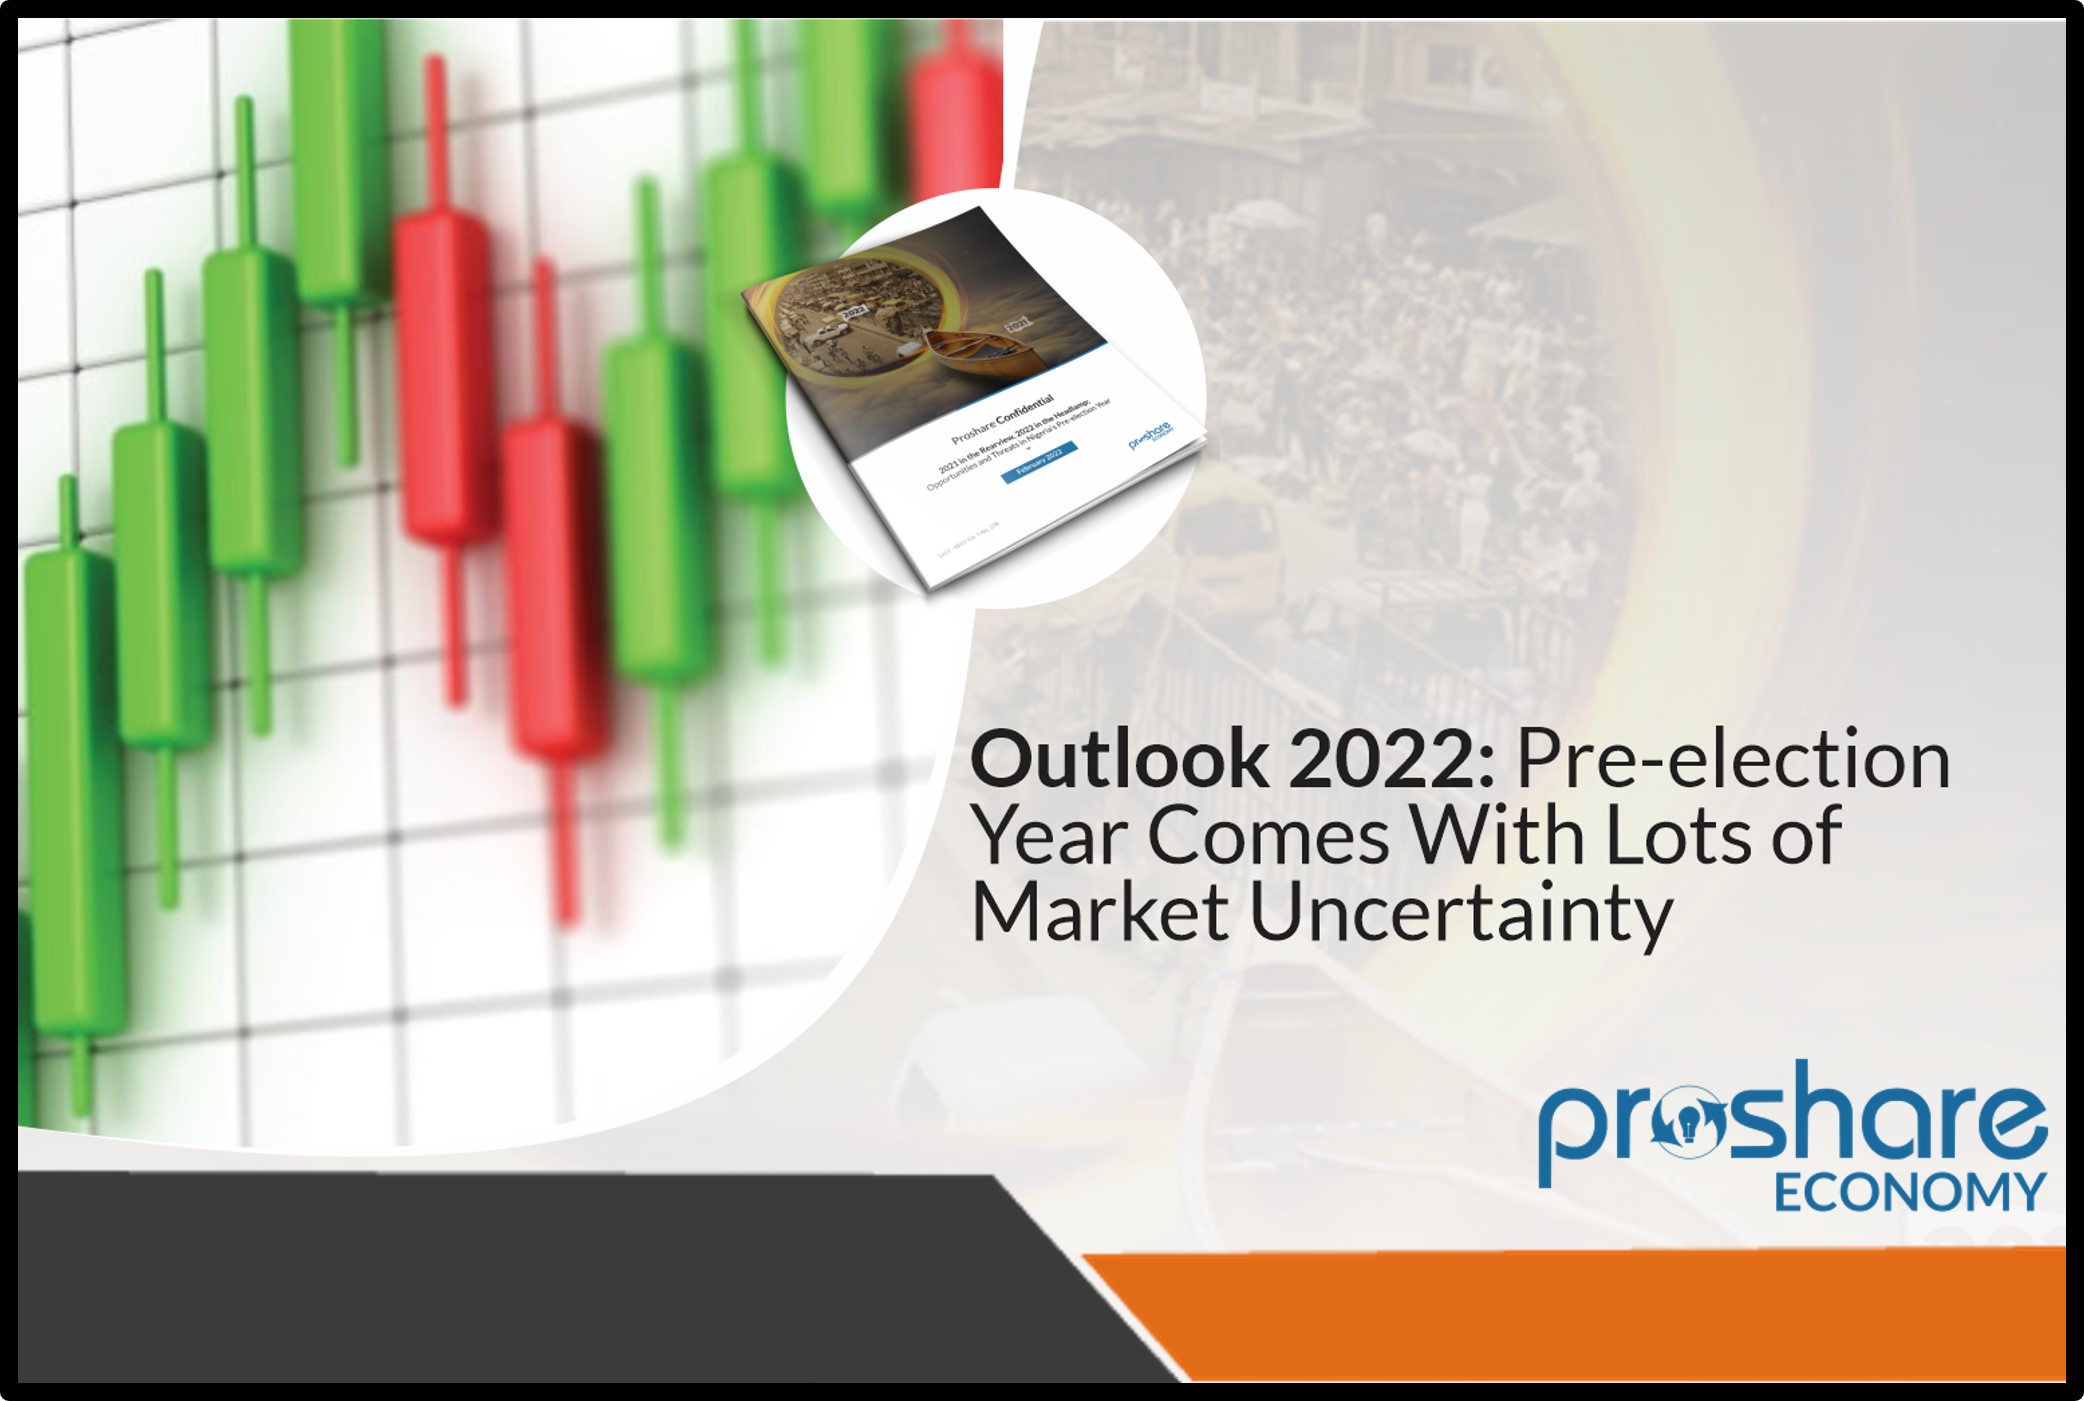 Outlook 2022: Pre-election Year Comes With Lots of Market Uncertainty